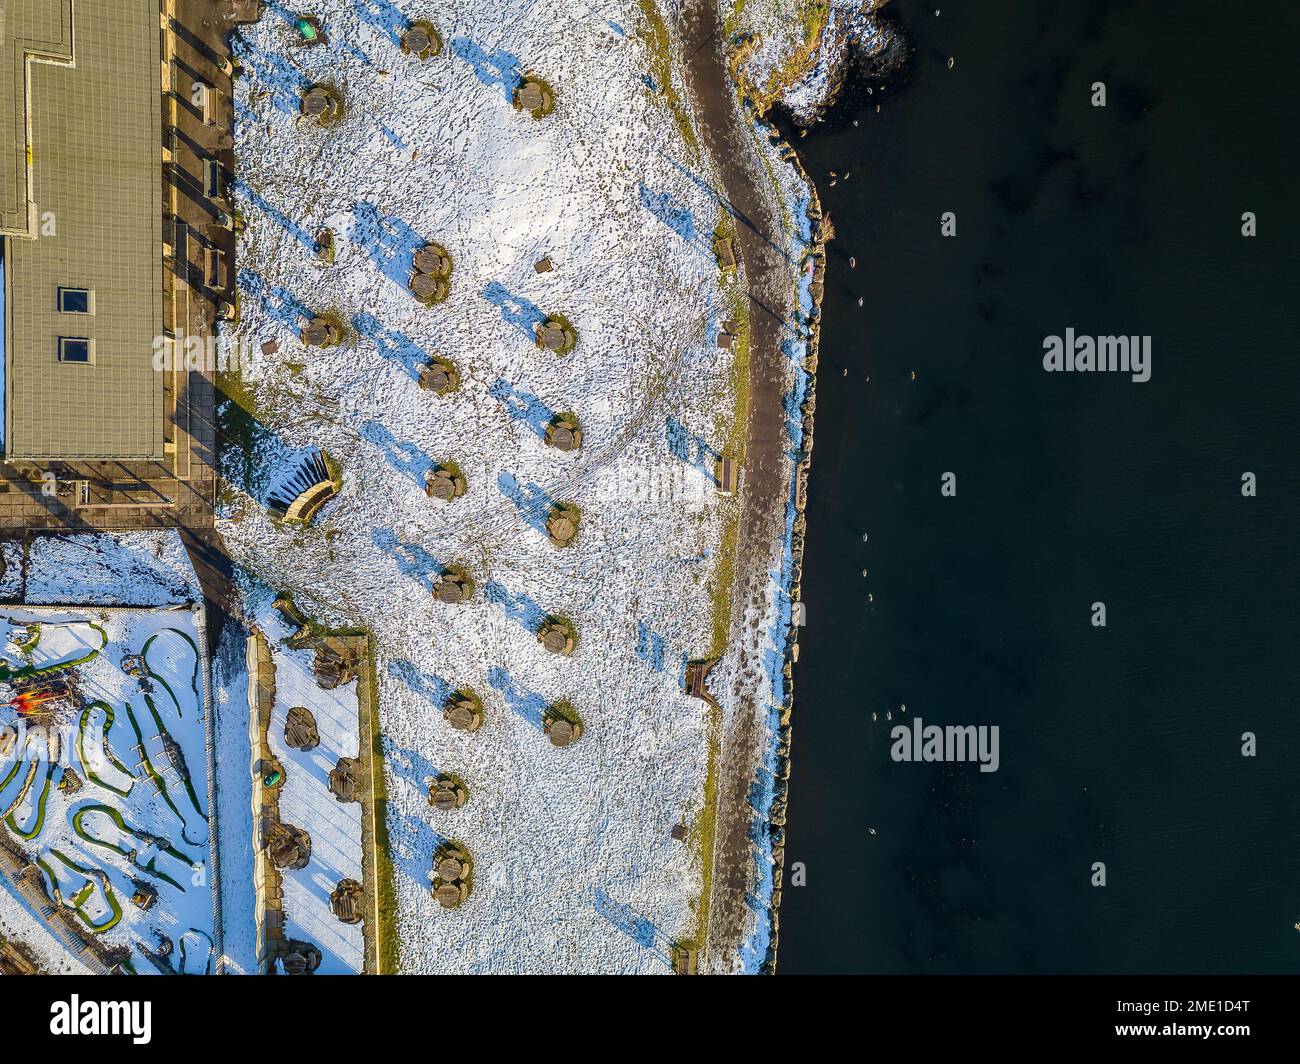 Aerial view of a freezing lake surrounded by snow in the South Wales Valleys (Bryn Bach) Stock Photo